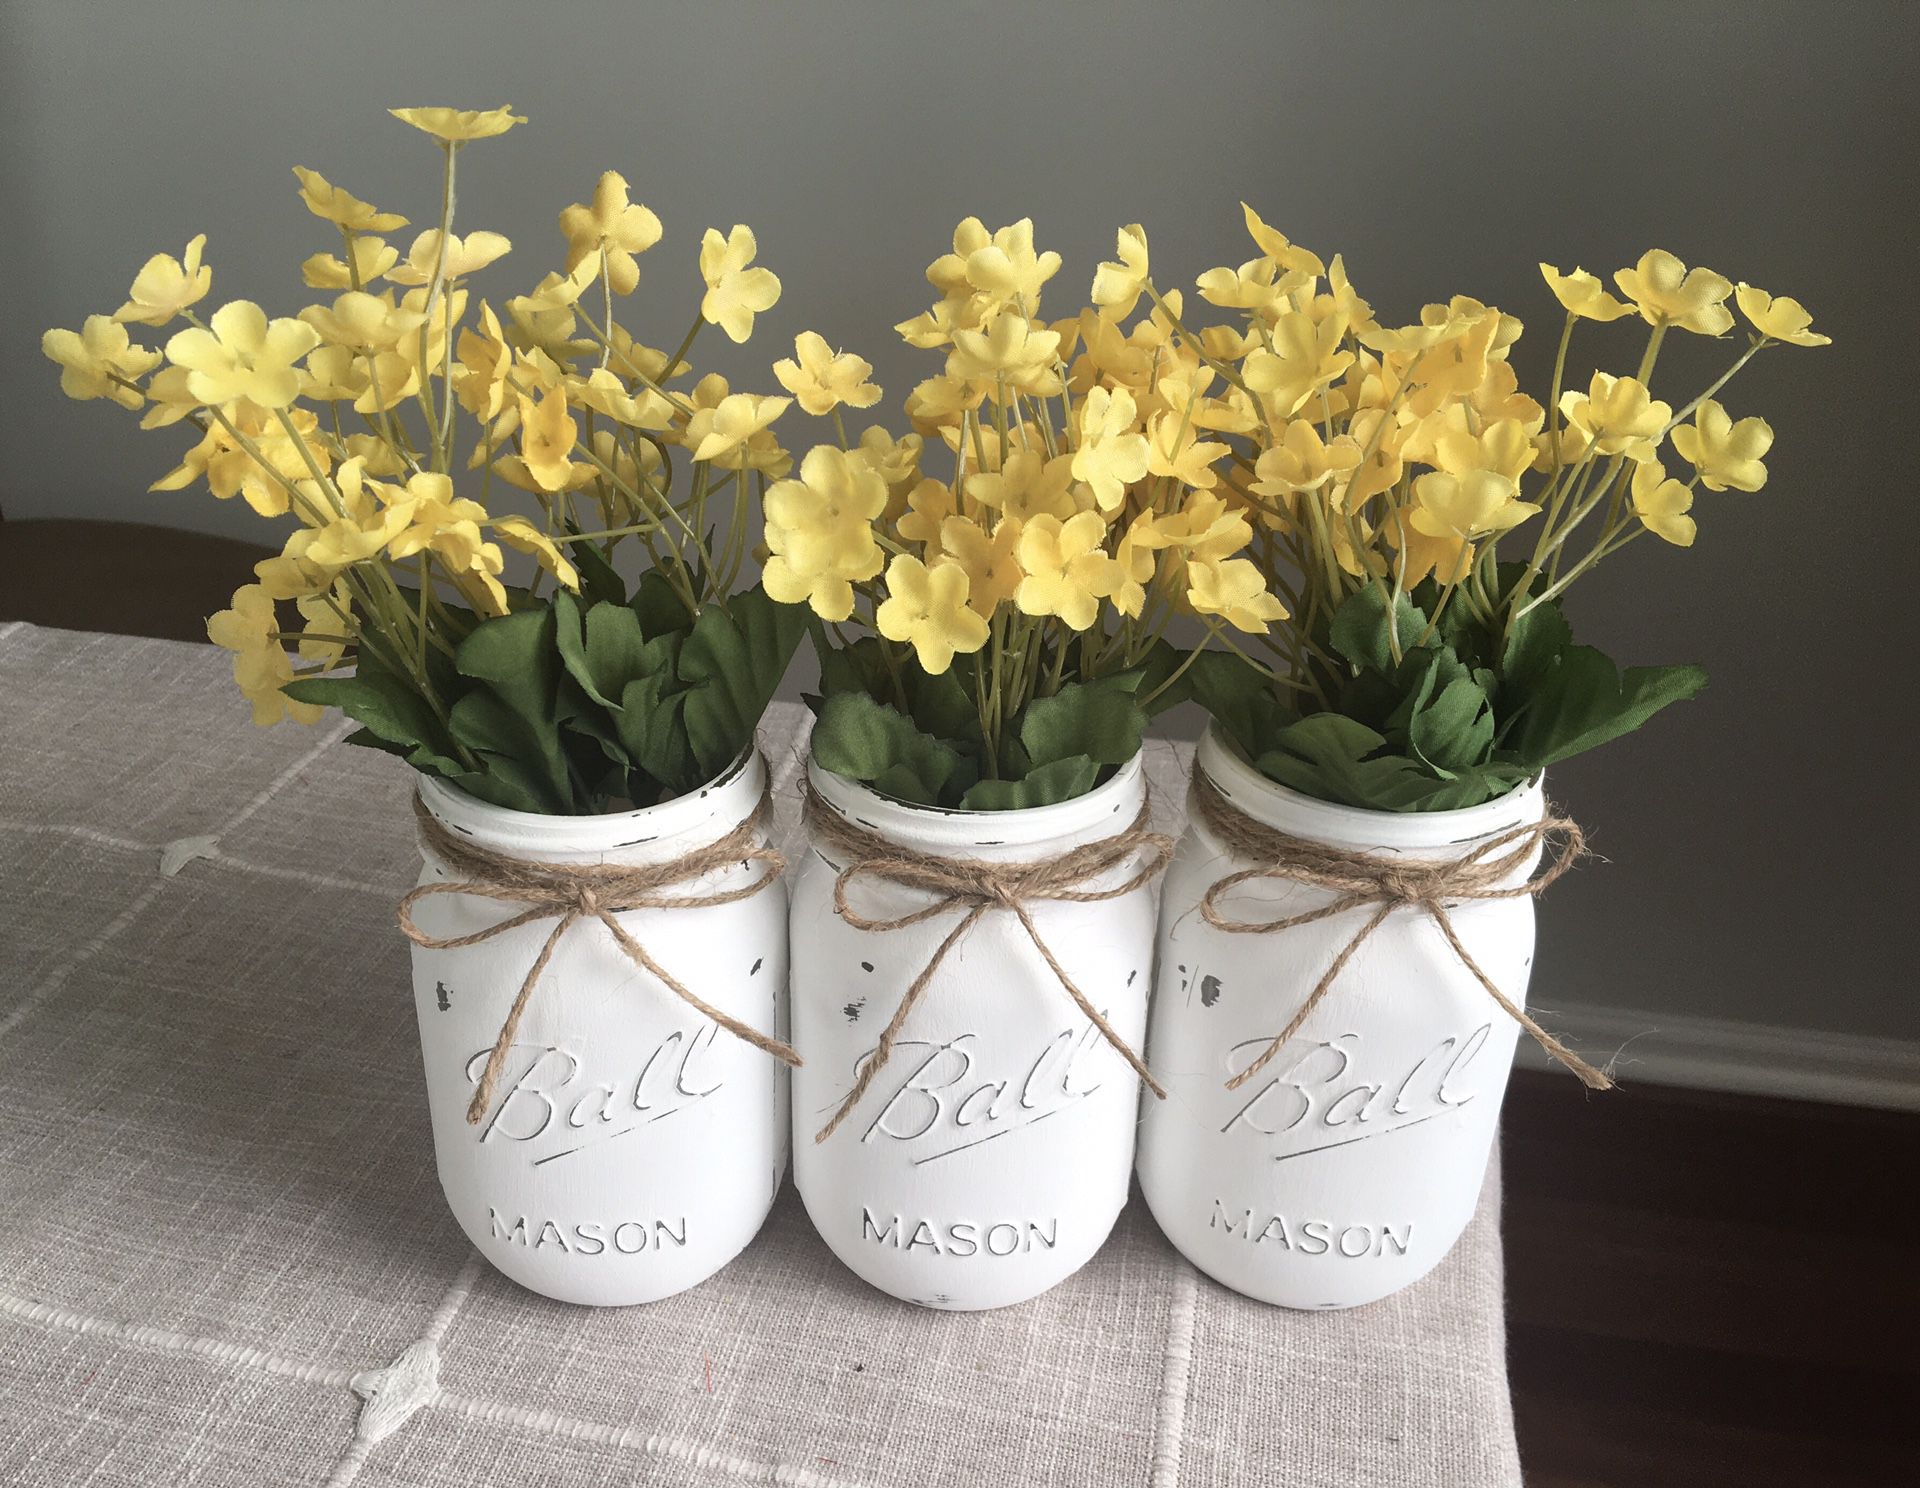 Distressed mason jar vases with flowers included!! Jar/flower choices shown in photos $16 for 3